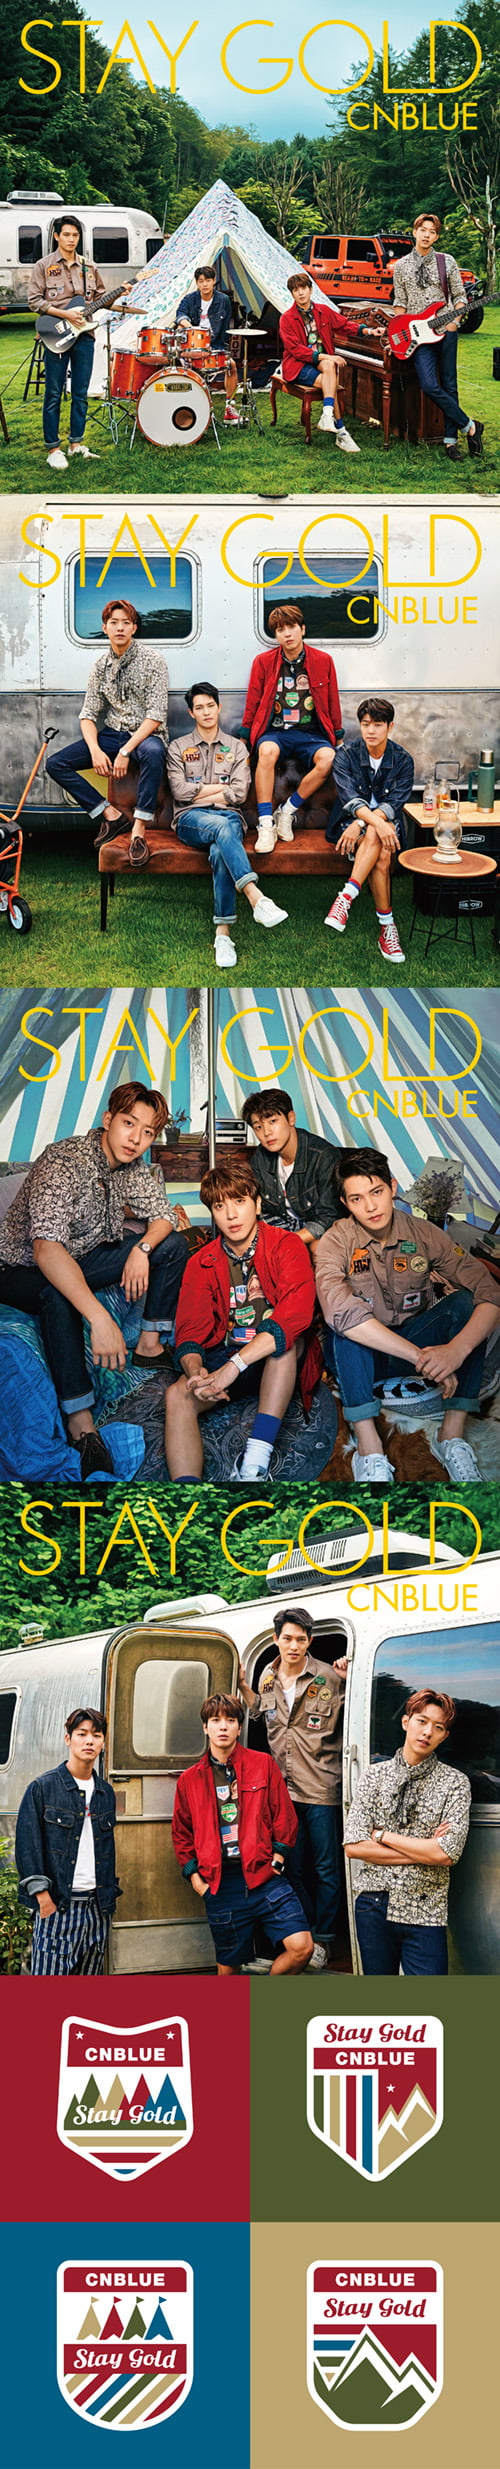 CNBLUE / STAY GOLD